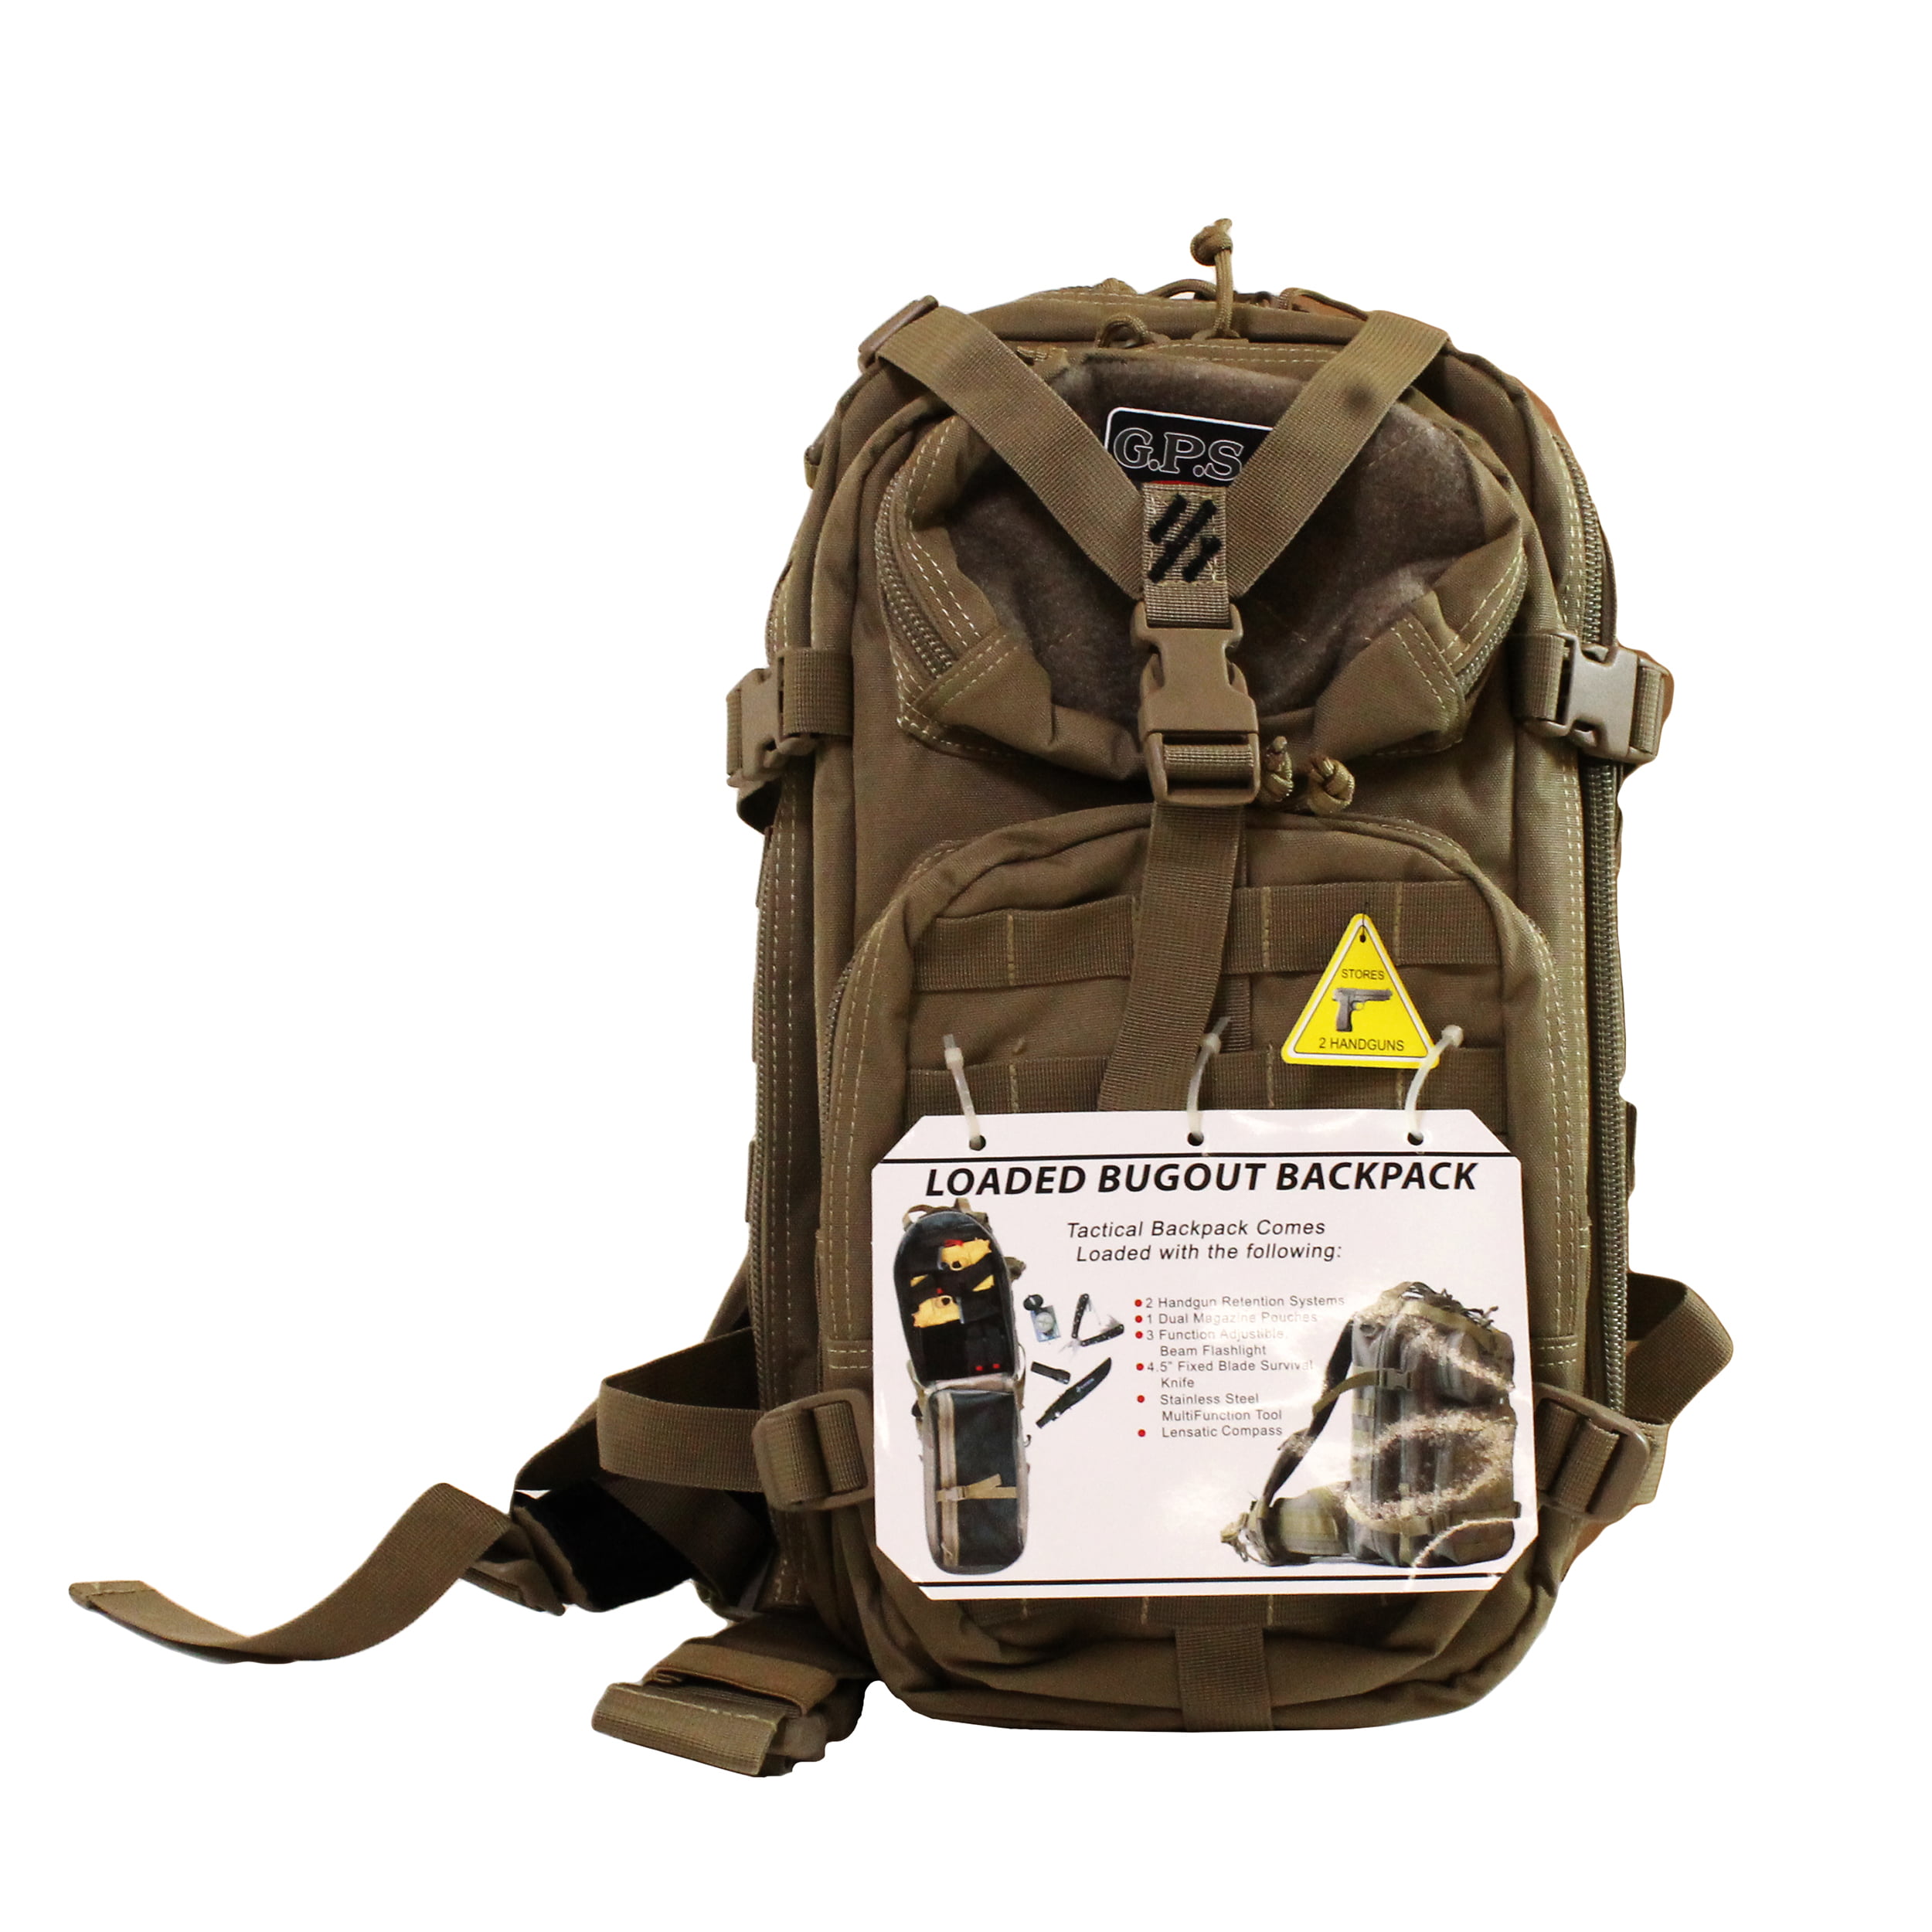 T1611ltb for sale online G Outdoors Tactical Loaded Bugout Backpack Tan 